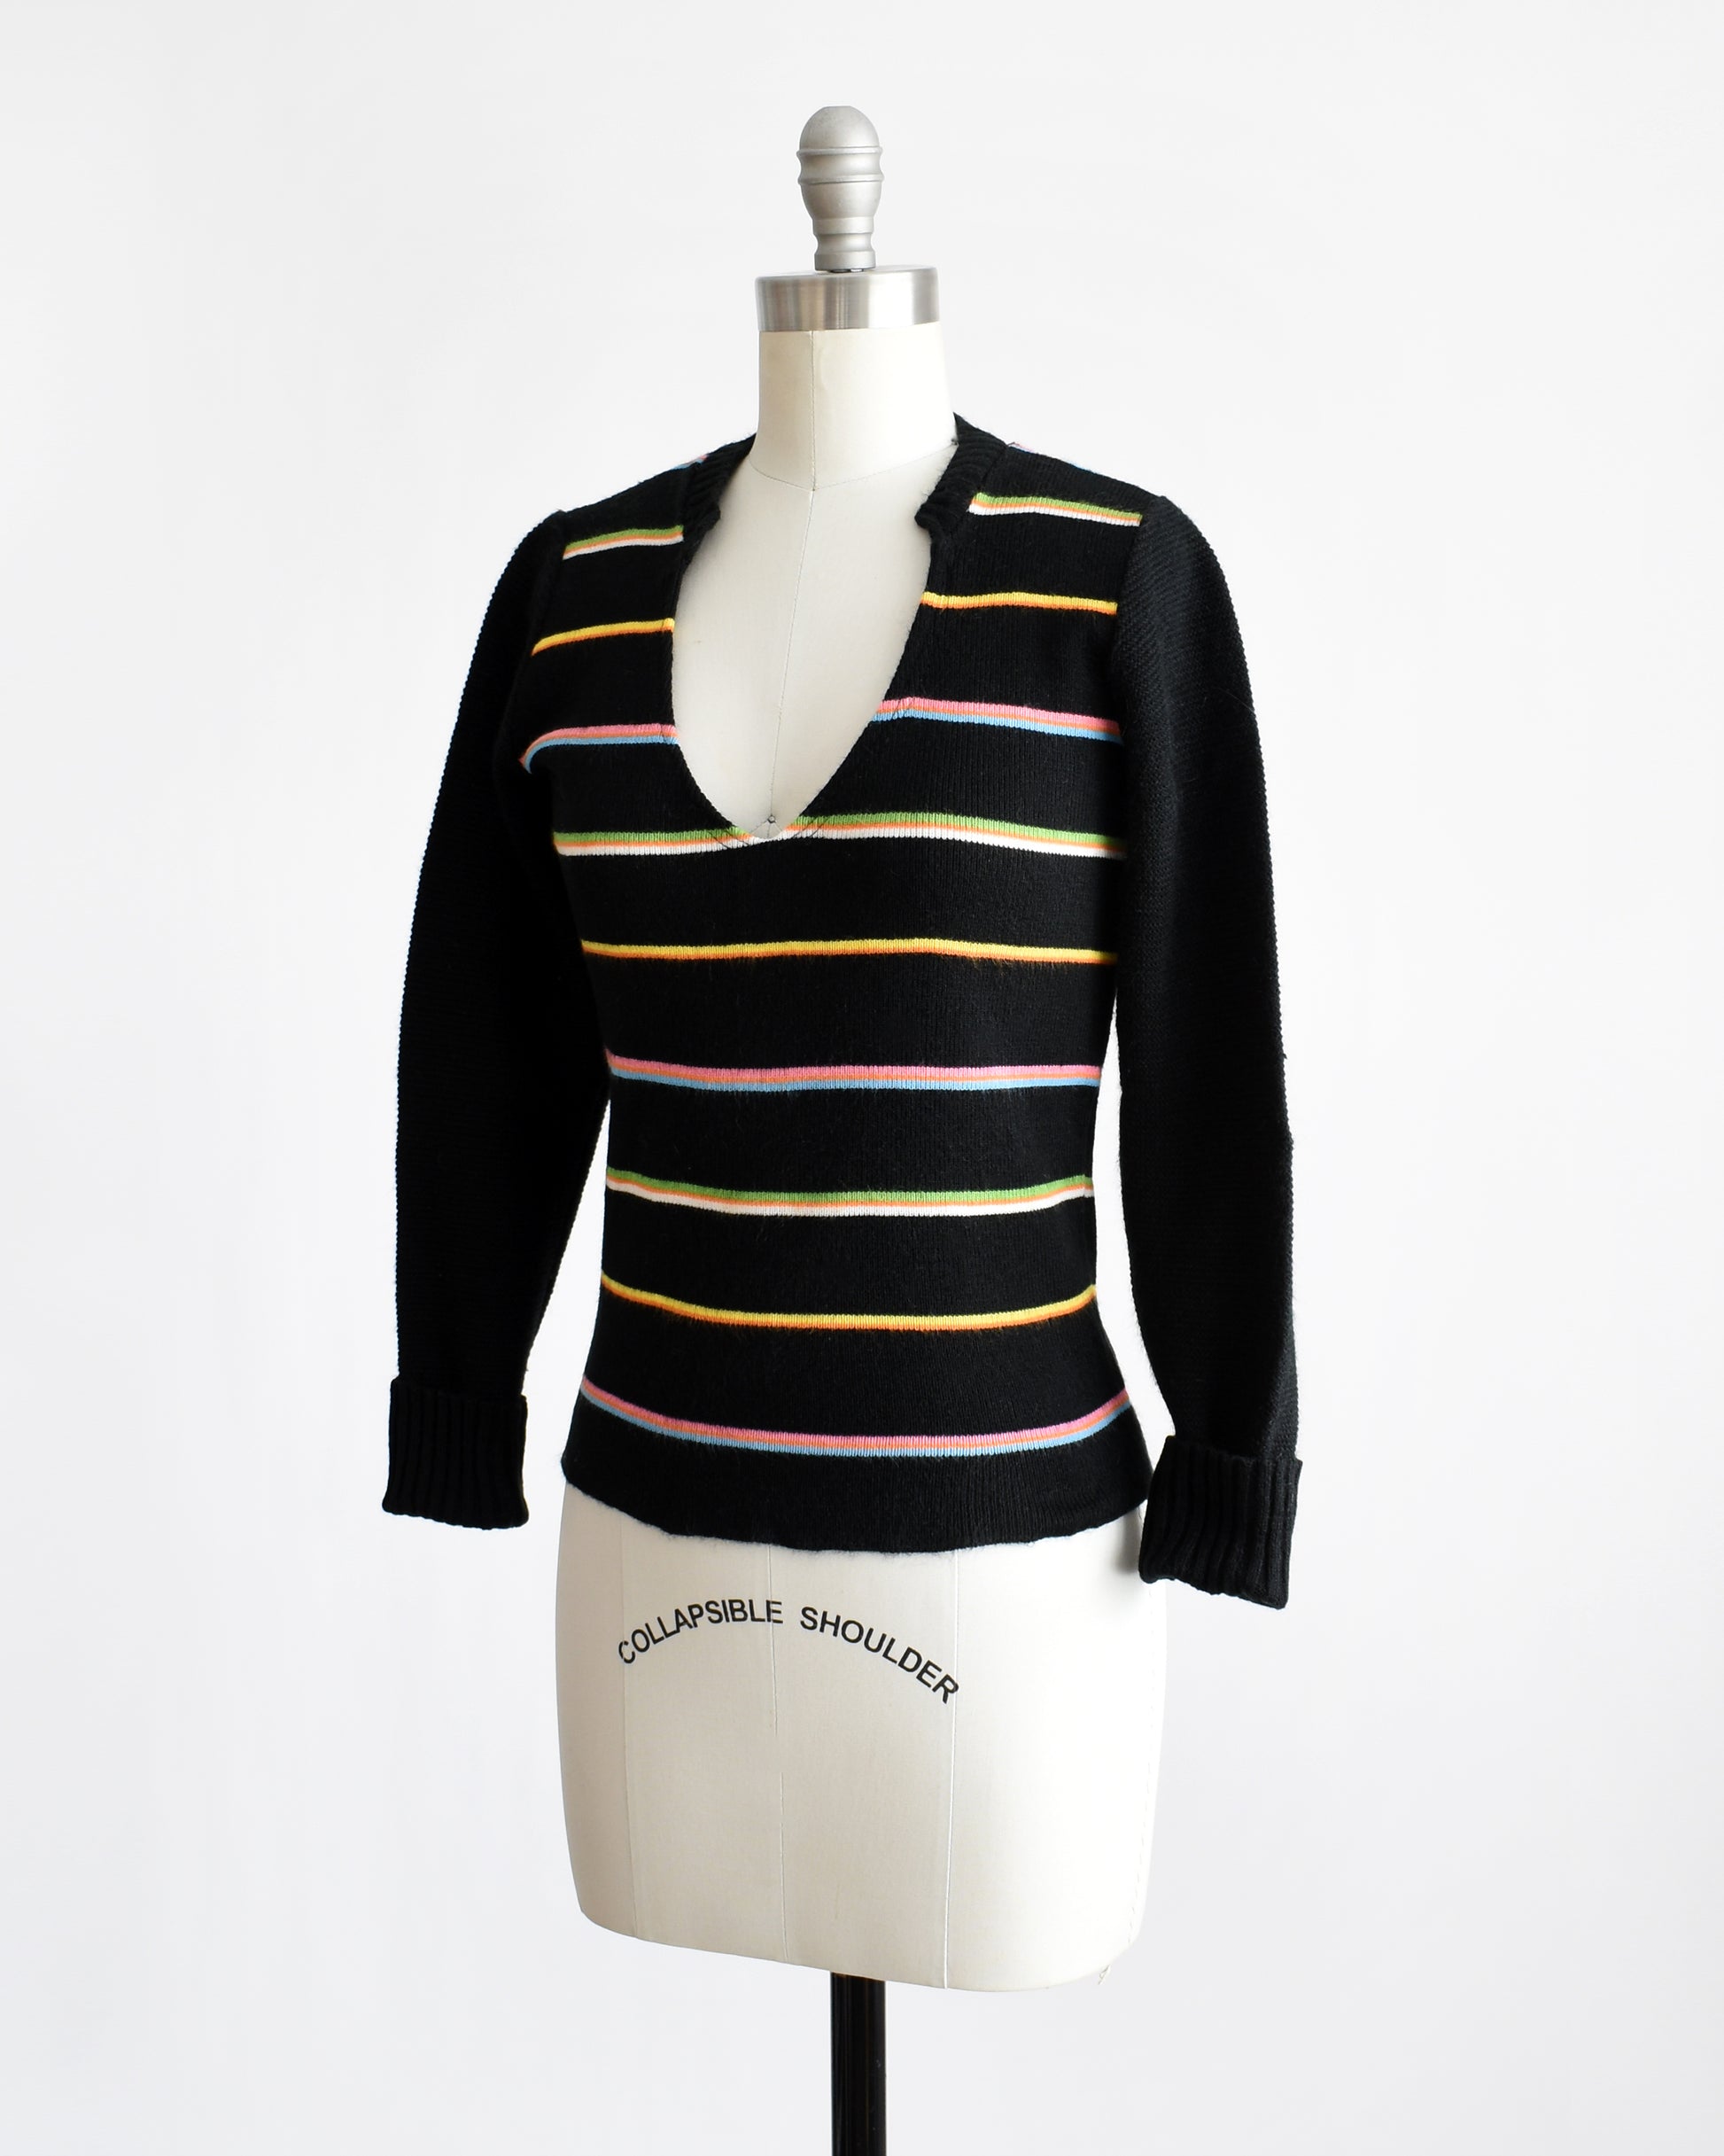 Side front view of a vintage 1970s sweater that features black knit with horizontal rainbow stripes, a curved v-neckline, and long sleeves that can be cuffed.